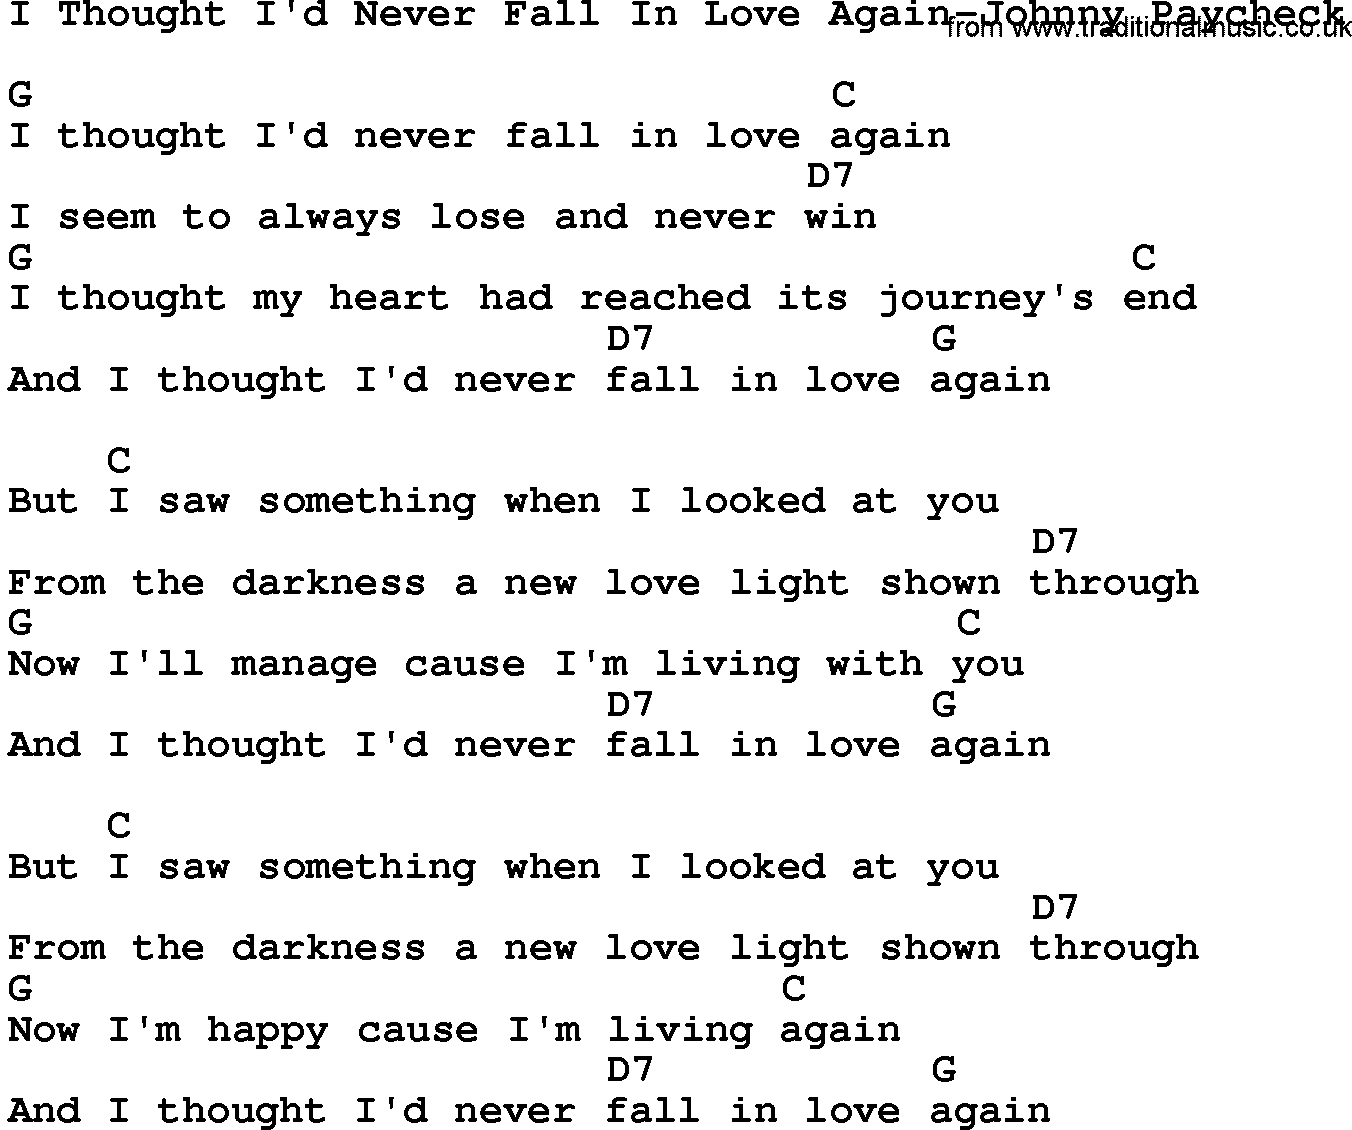 Country music song: I Thought I'd Never Fall In Love Again-Johnny Paycheck lyrics and chords